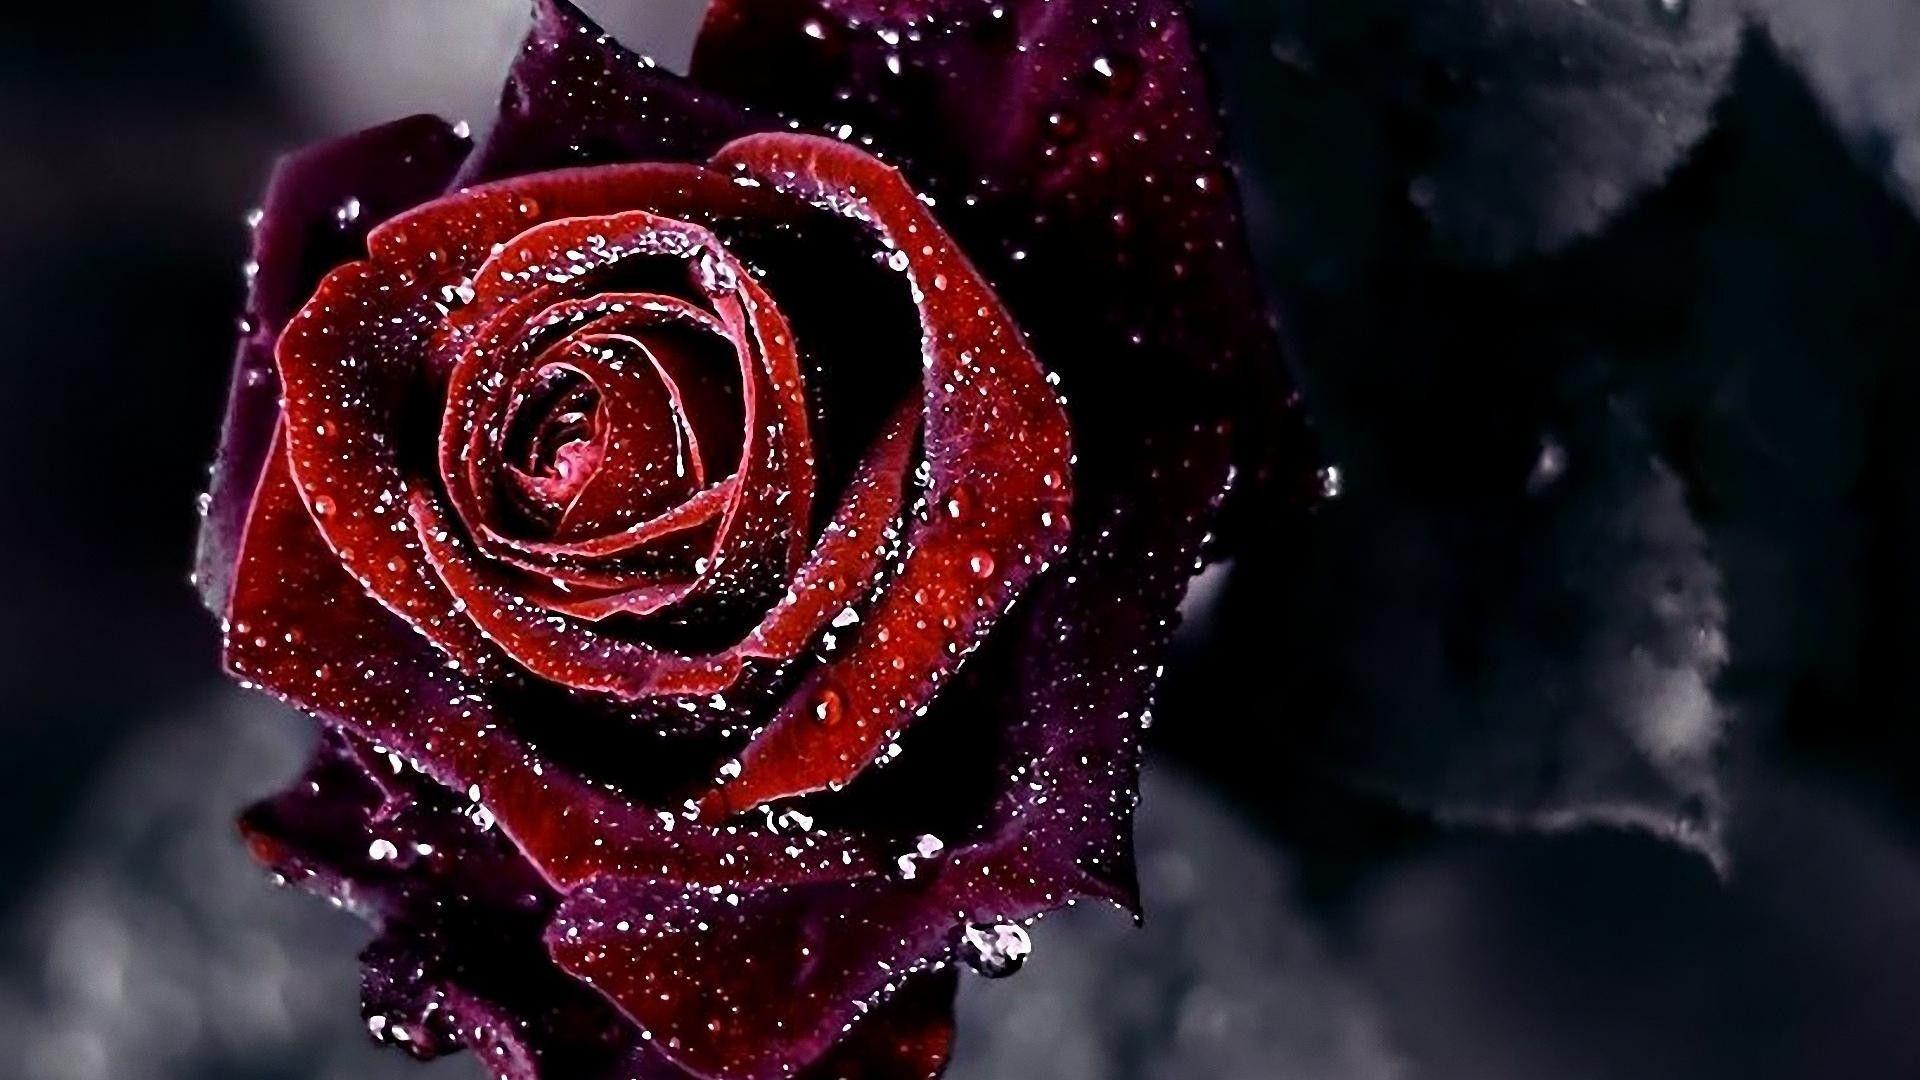 HD 4K dark red rose Wallpapers for Mobile